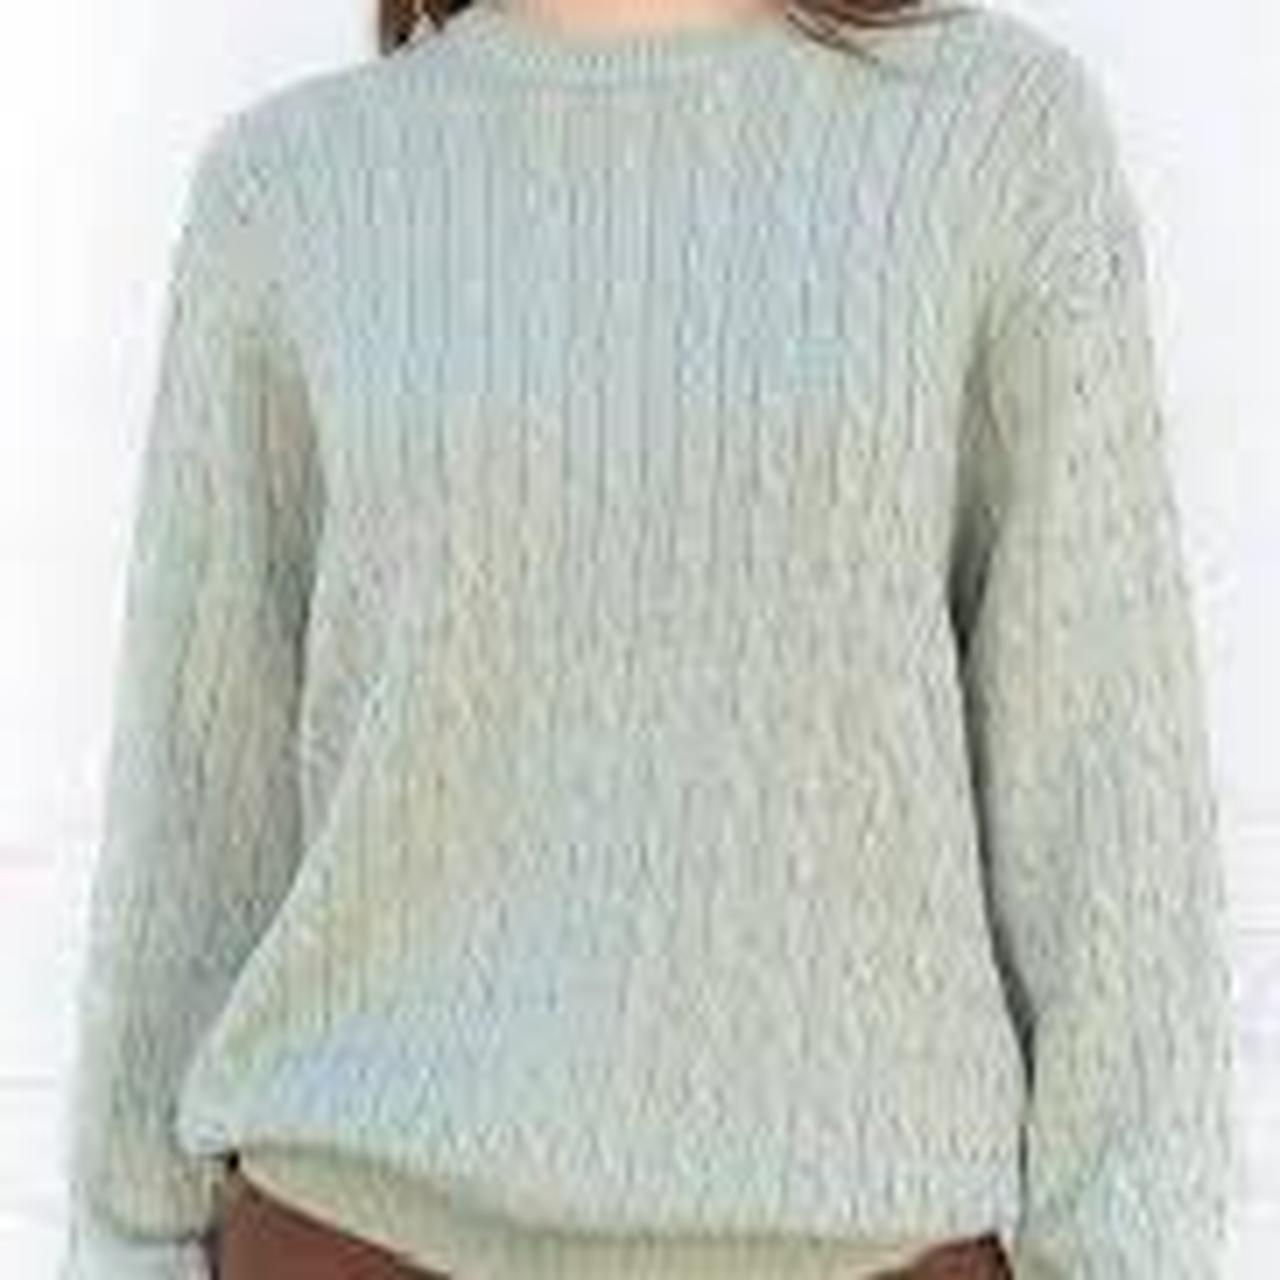 Brandy Melville Women's Grey Gray Knit Sweater Cotton Pullover